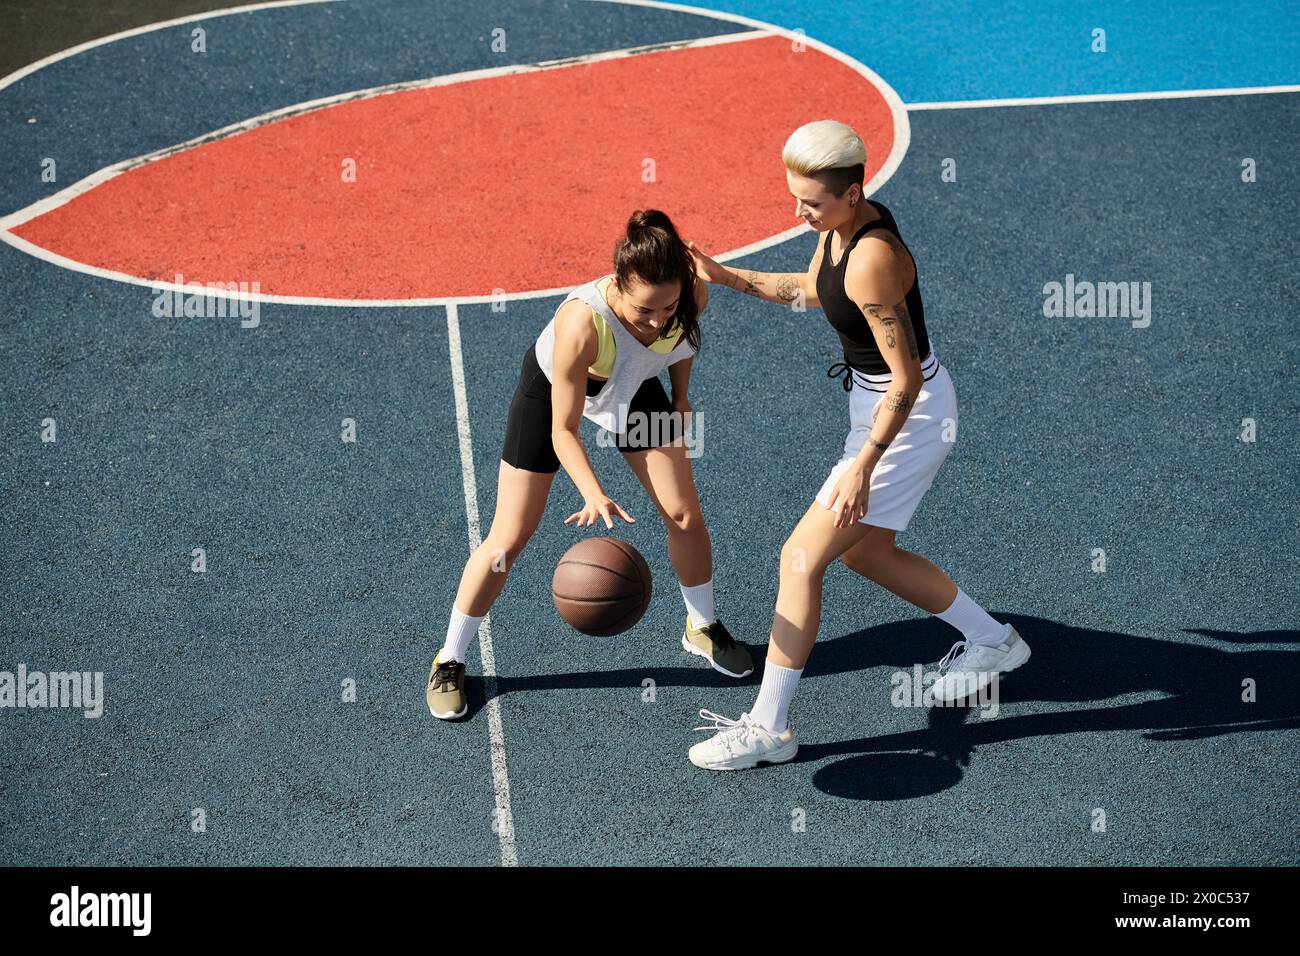 Two athletic young women stand proudly on top of a basketball court, exuding confidence and sportsmanship on a sunny day. Stock Photo